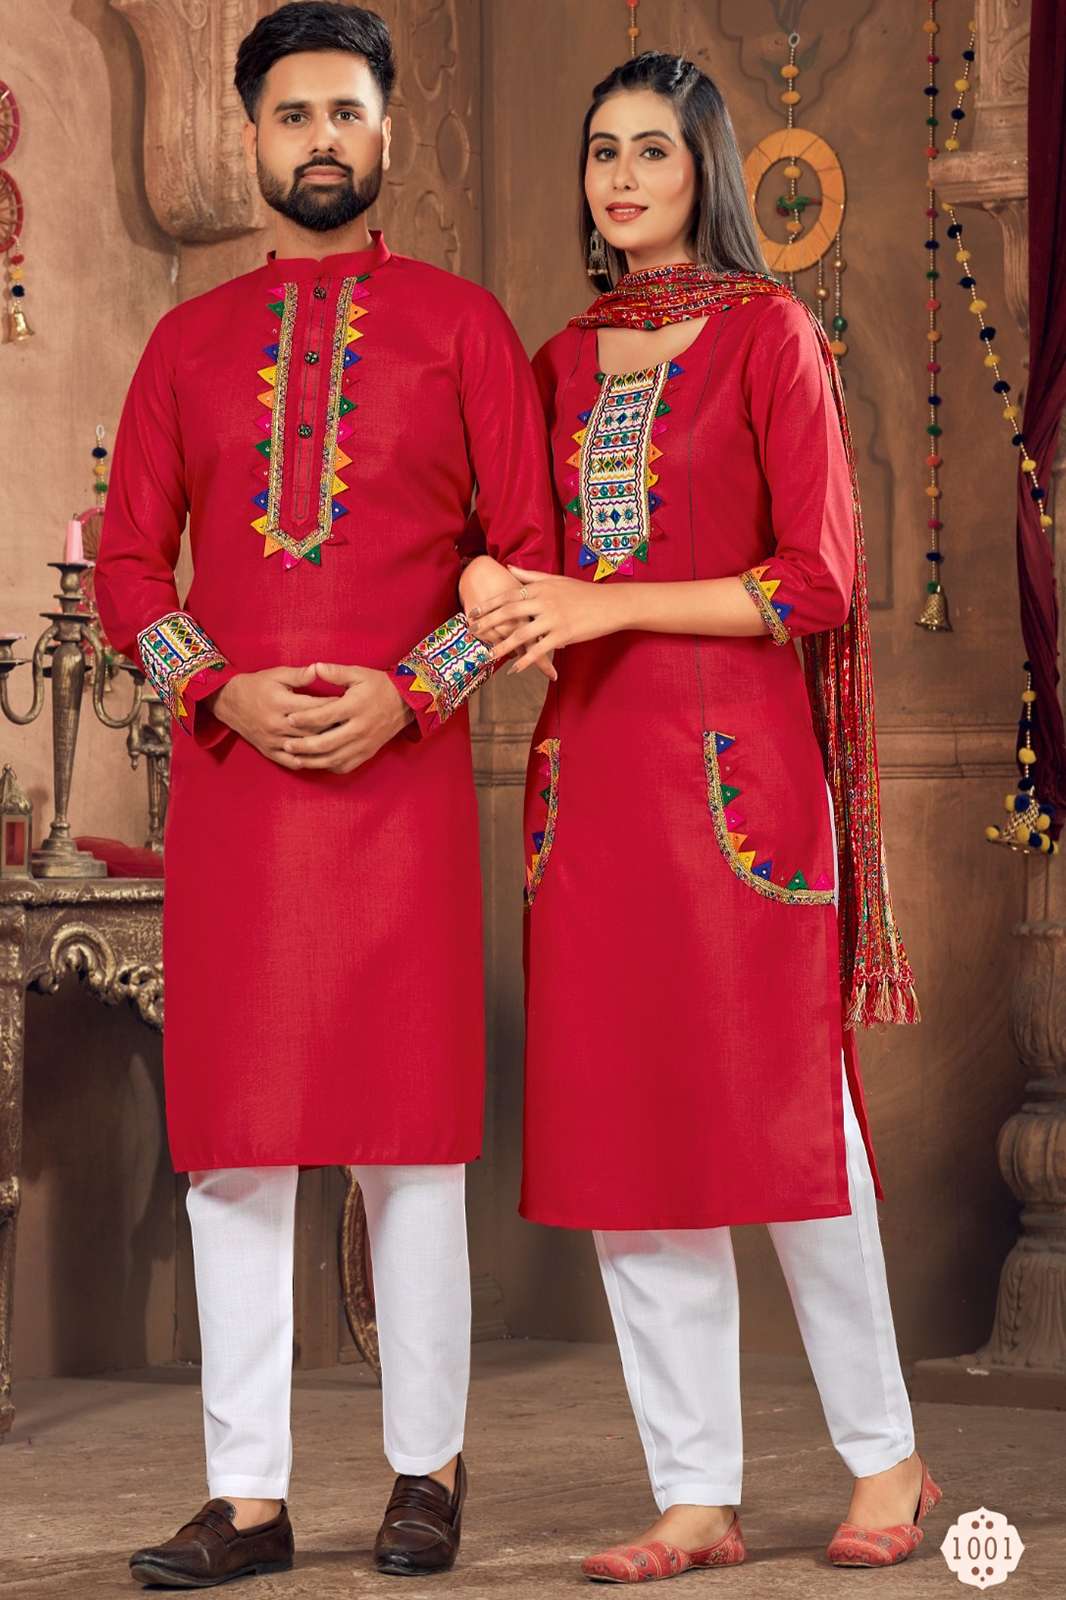 BANWARI FASHION Couple Goal Pure Cotton  With Embroidery &  Stylish Pattern with Exclusive Look.